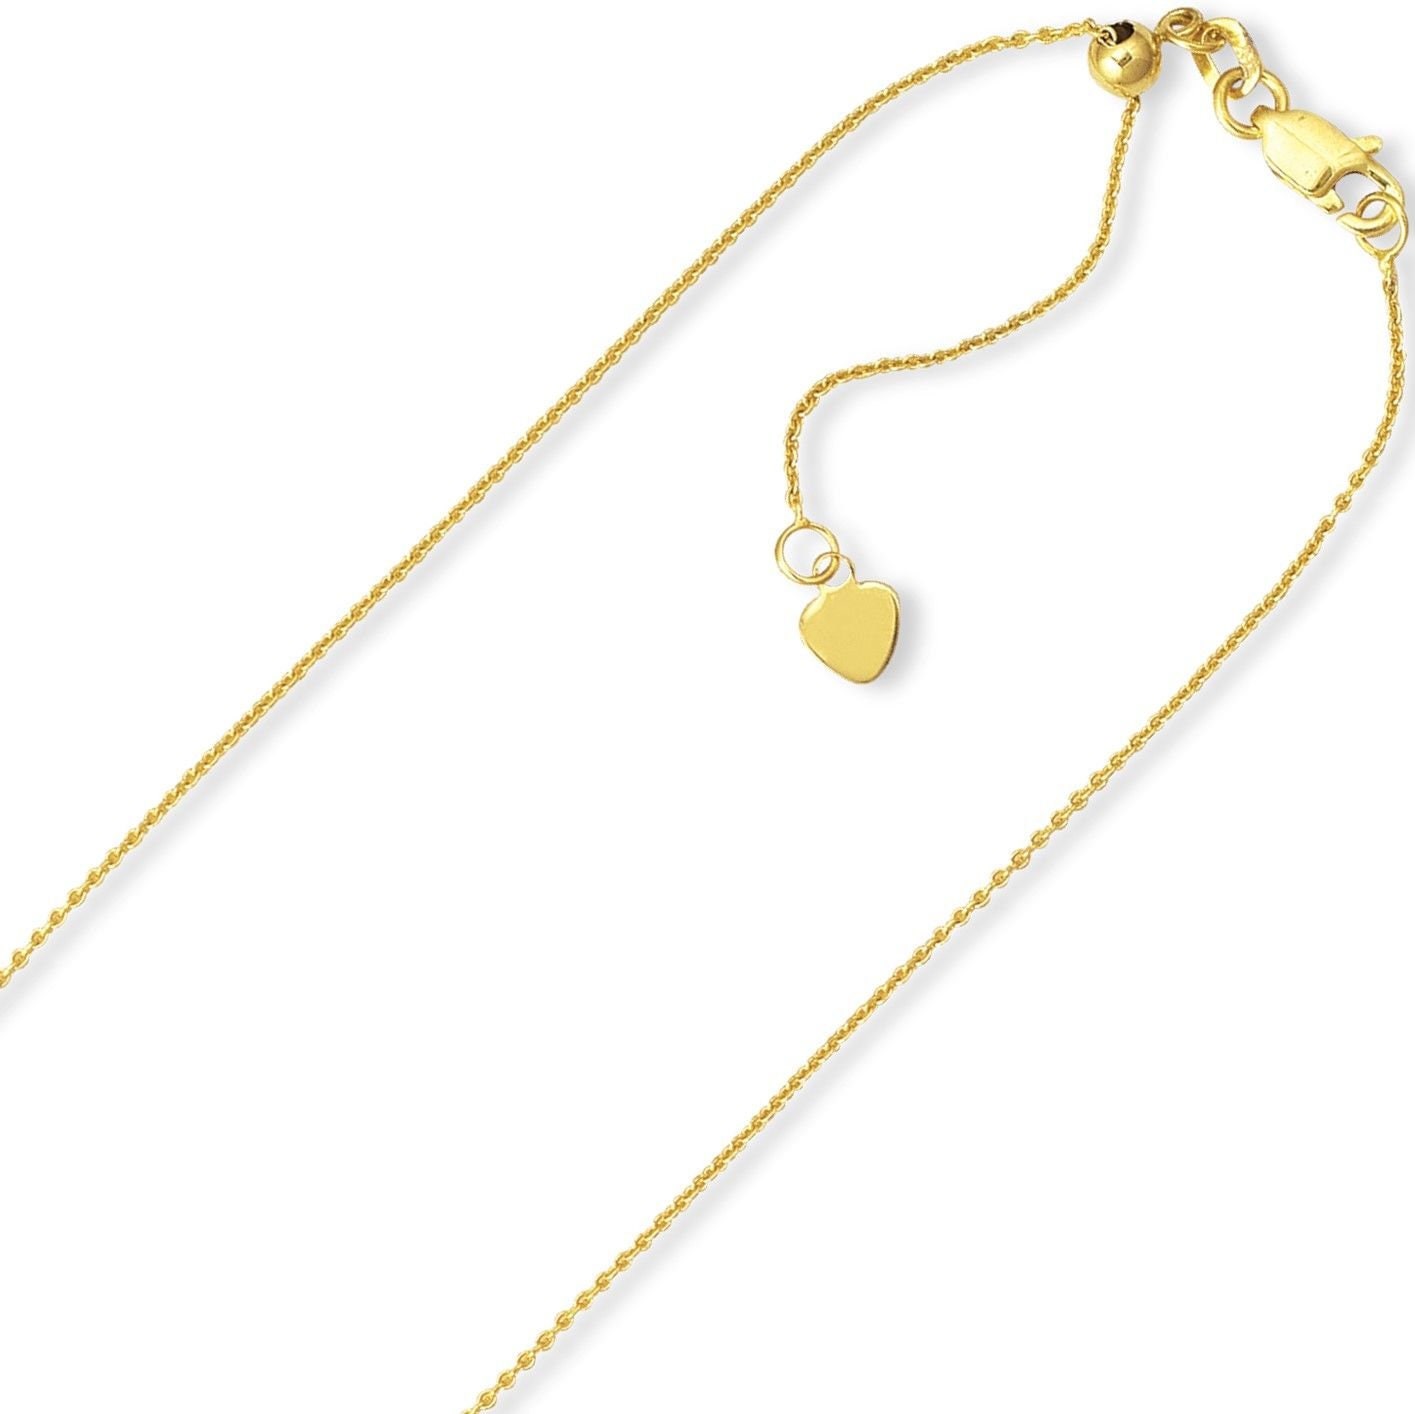 Adjustable Chain Choker - Gold Chain Necklace-Gold Chain For Women – Niscka